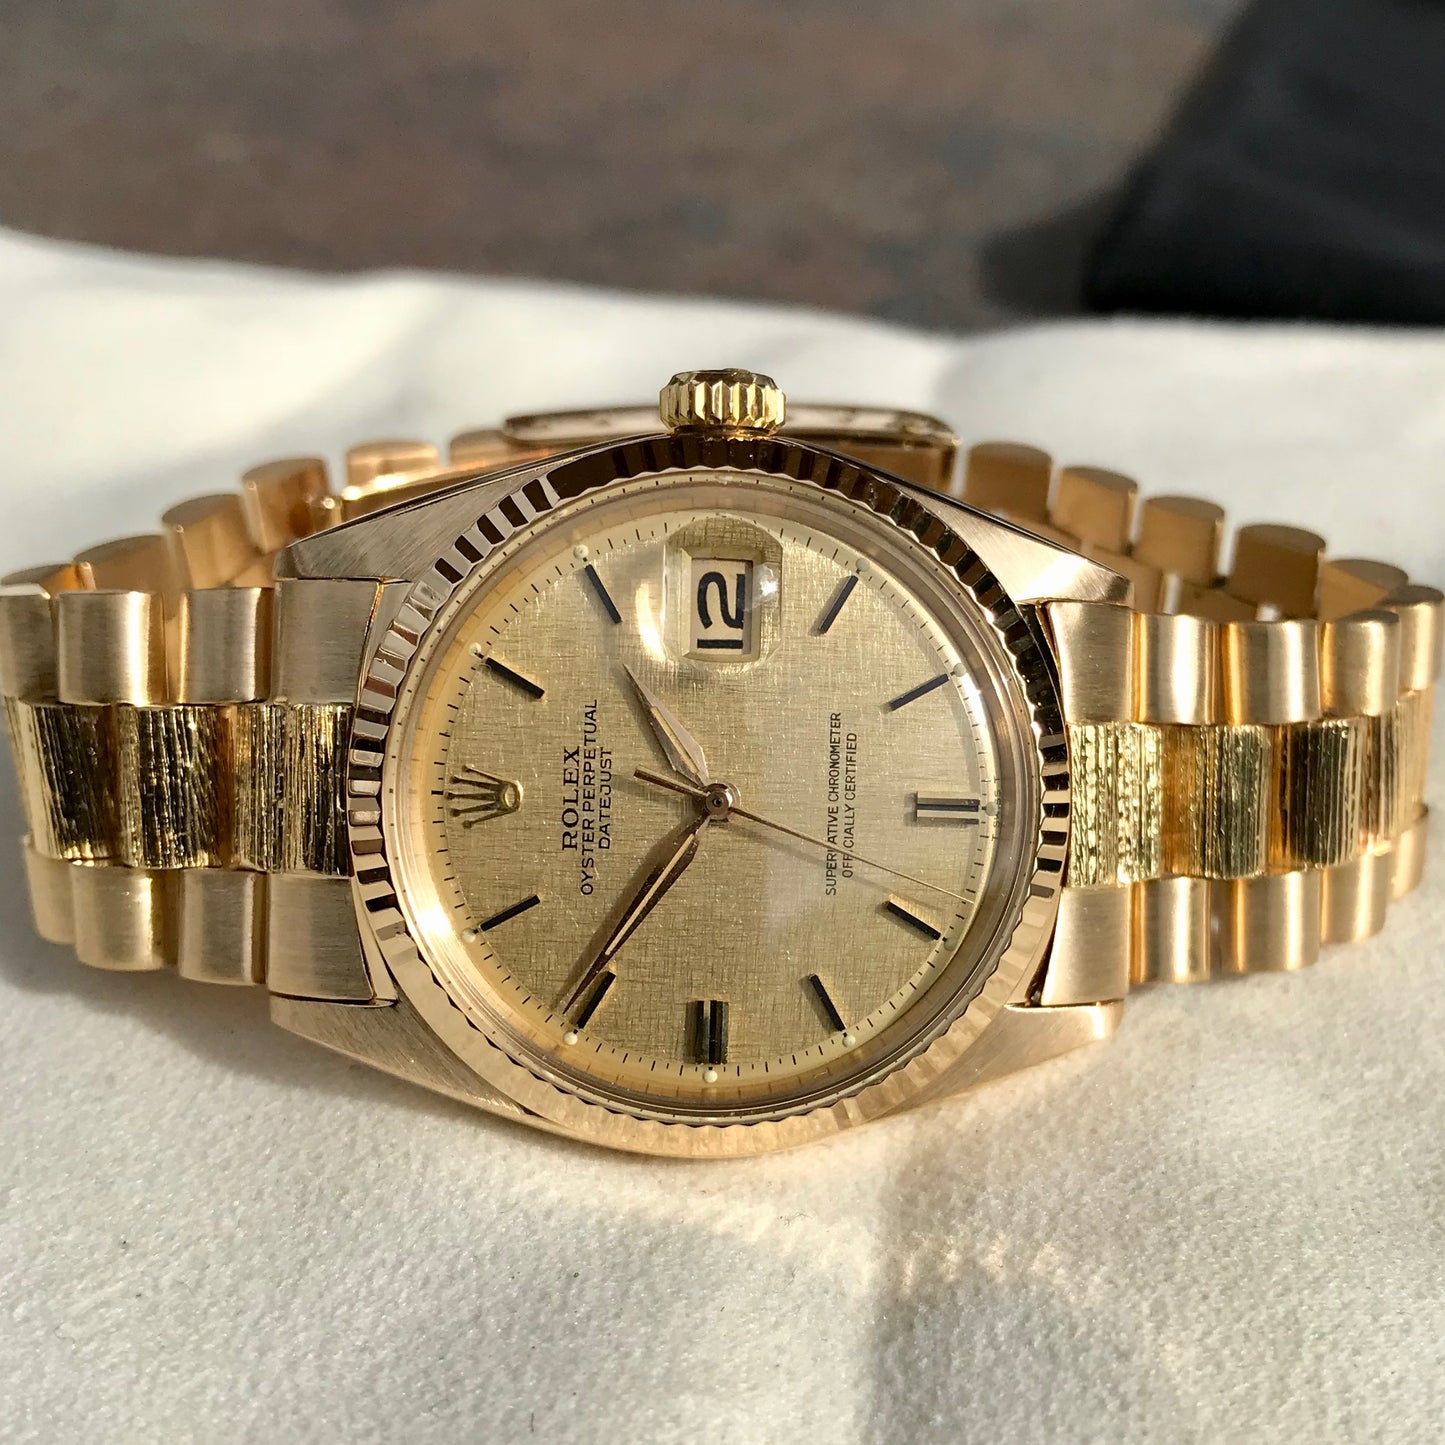 Vintage Rolex Datejust 1601 18K Yellow Gold Champagne Linen Bark Automatic Wristwatch - Hashtag Watch Company